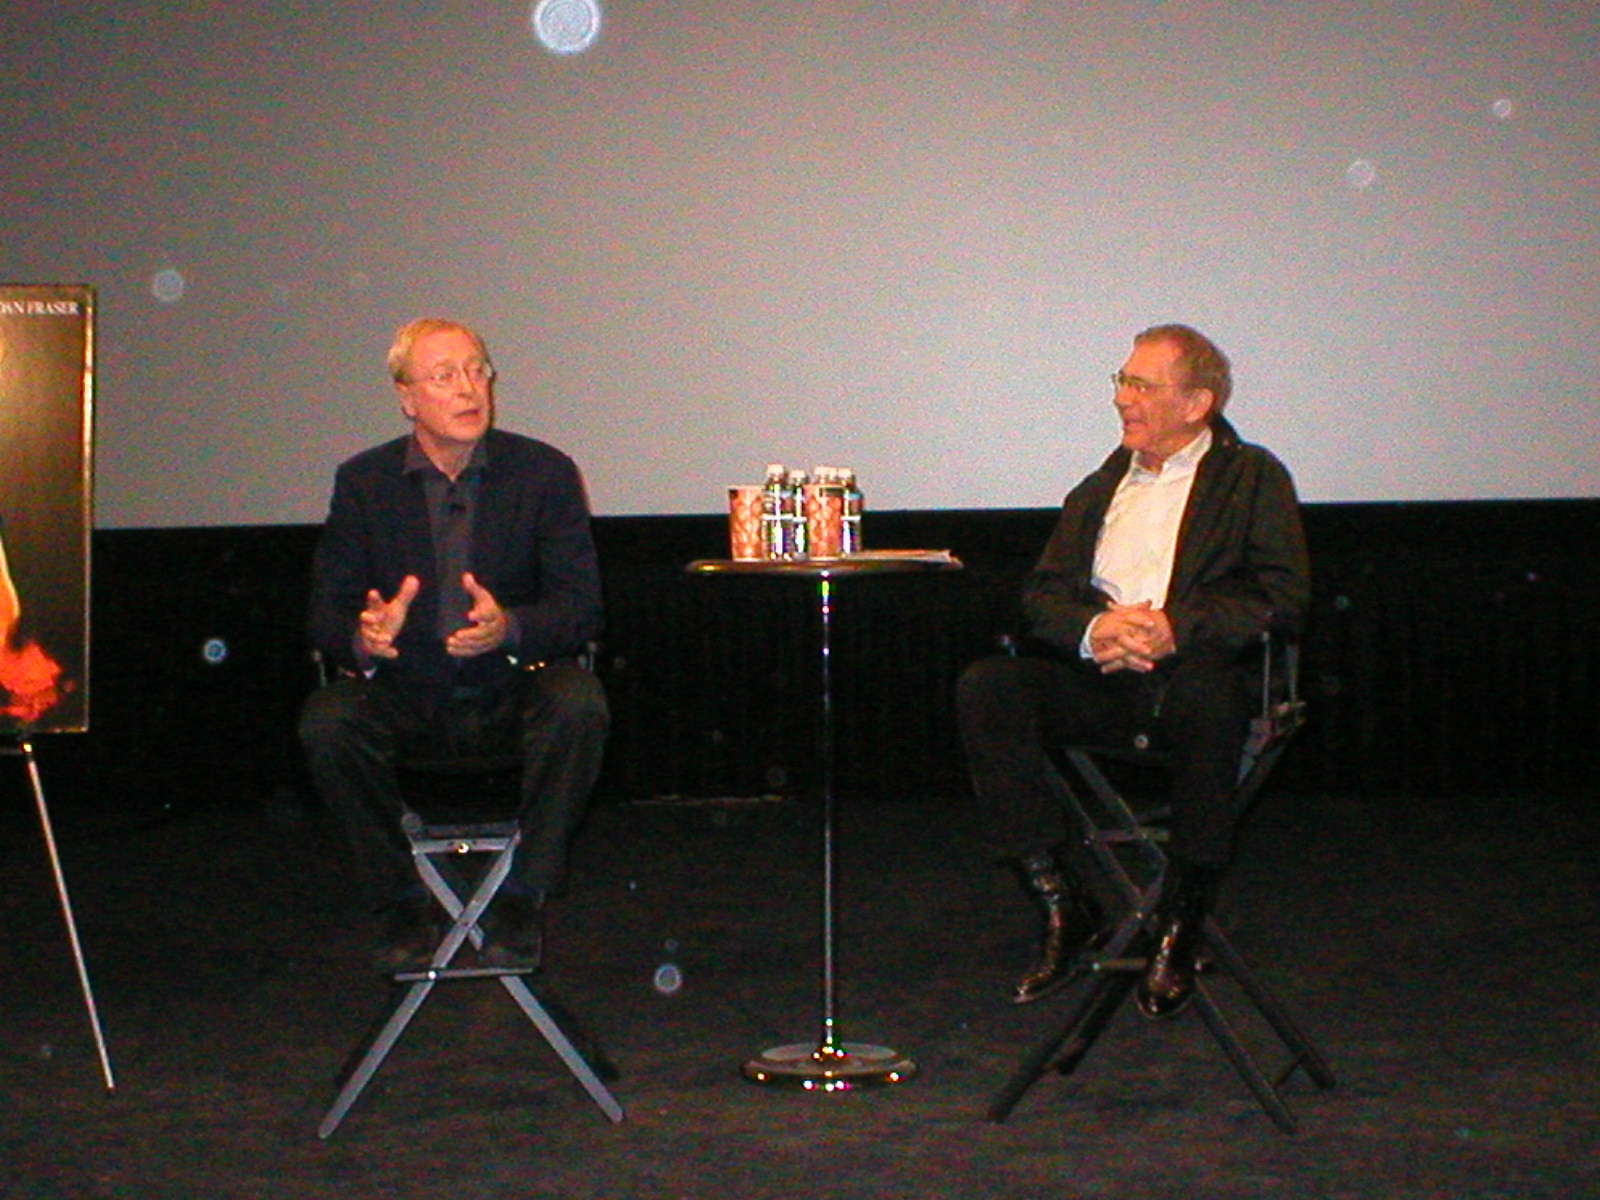 Michael Caine with moderator Sydney Pollack at Los Angeles Conversations screening/Q&A produced by Bob Nuchow